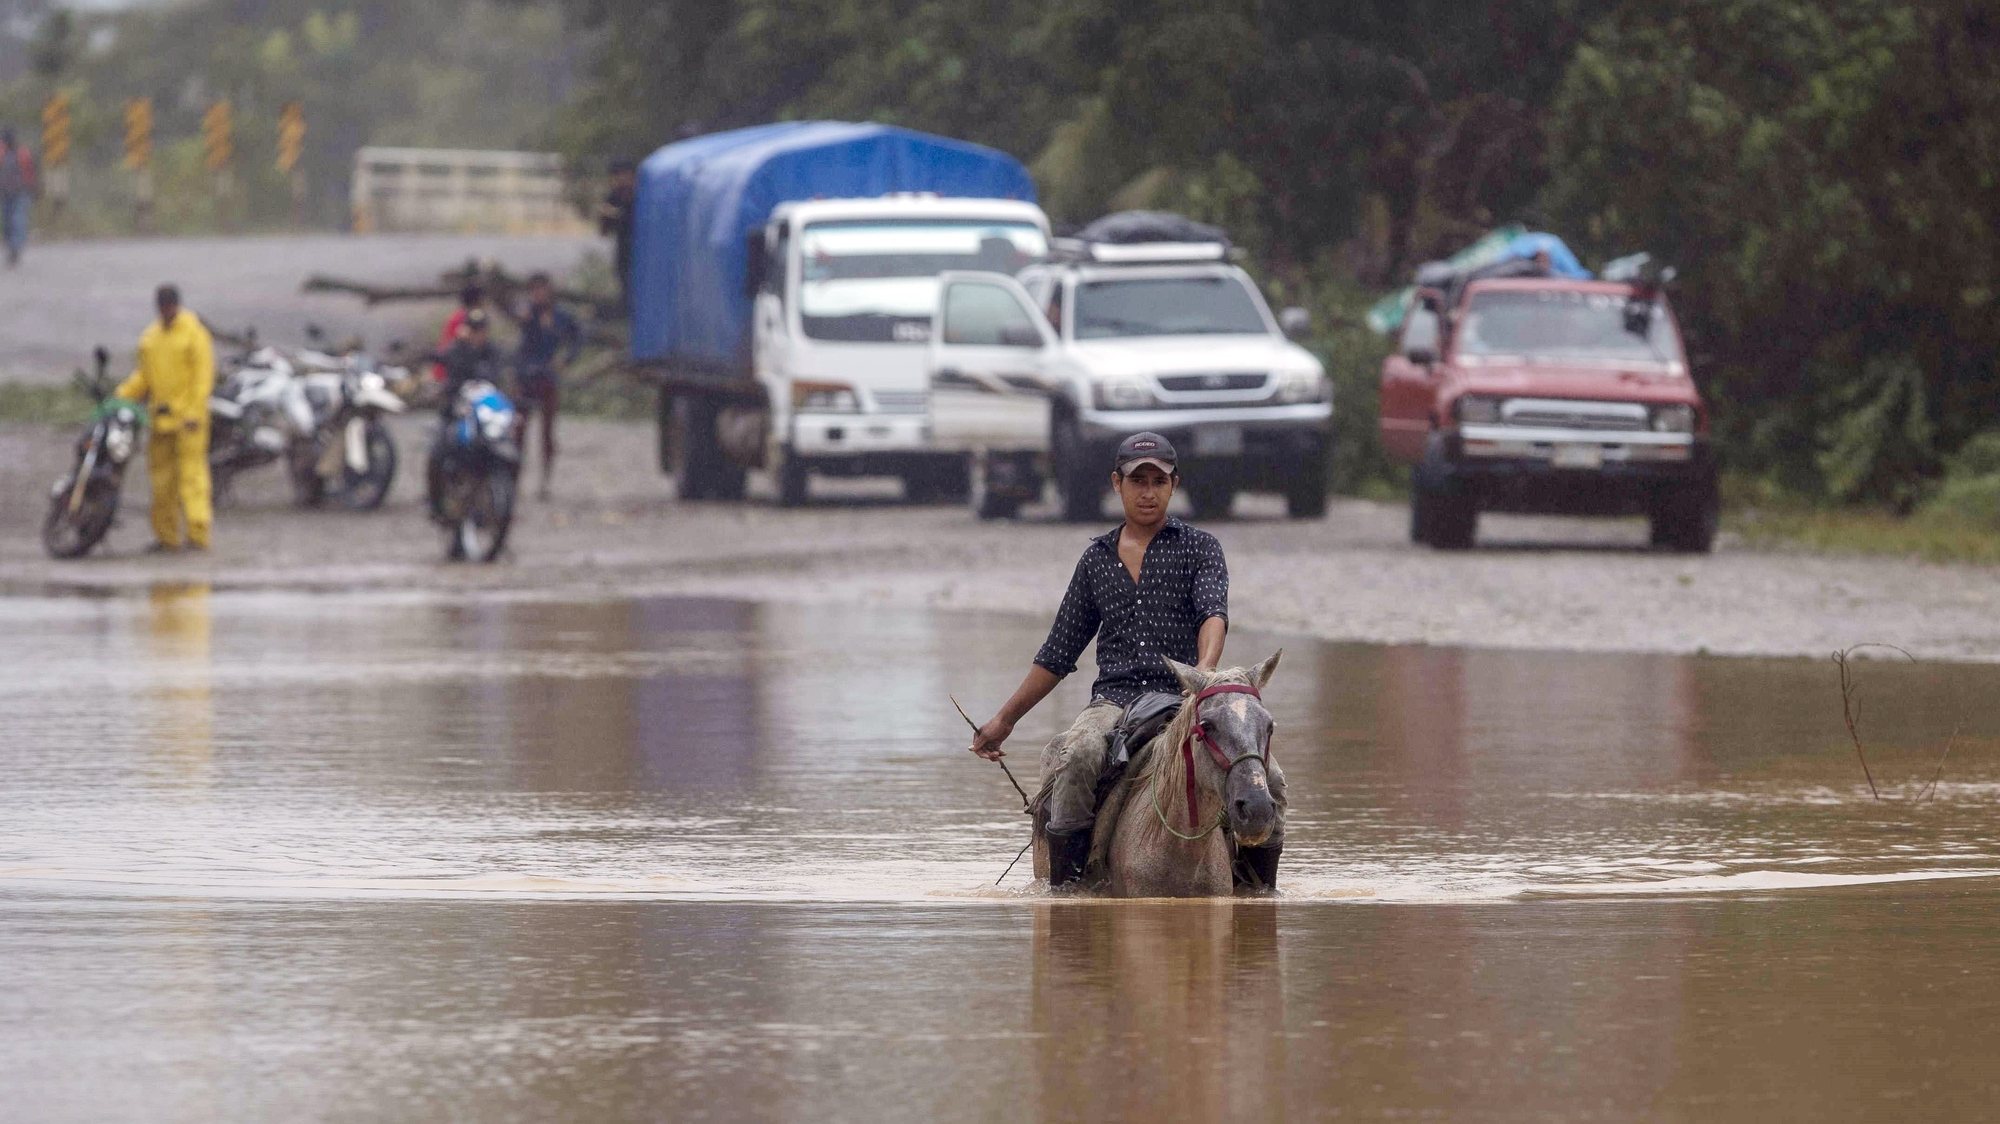 epa08798473 A farmer mounted on his horse crosses a flooded road in the Okonwas community during the passage of Hurricane Eta on the north Caribbean coast in Rosita, Nicaragua, 04 November 2020. The dangerous hurricane Eta, which made landfall in Nicaragua this Tuesday as a category 4, weakened to a tropical storm, but is still expected to cause problems in parts of Central America, before leaving for the Caribbean again.  EPA/JORGE TORRES